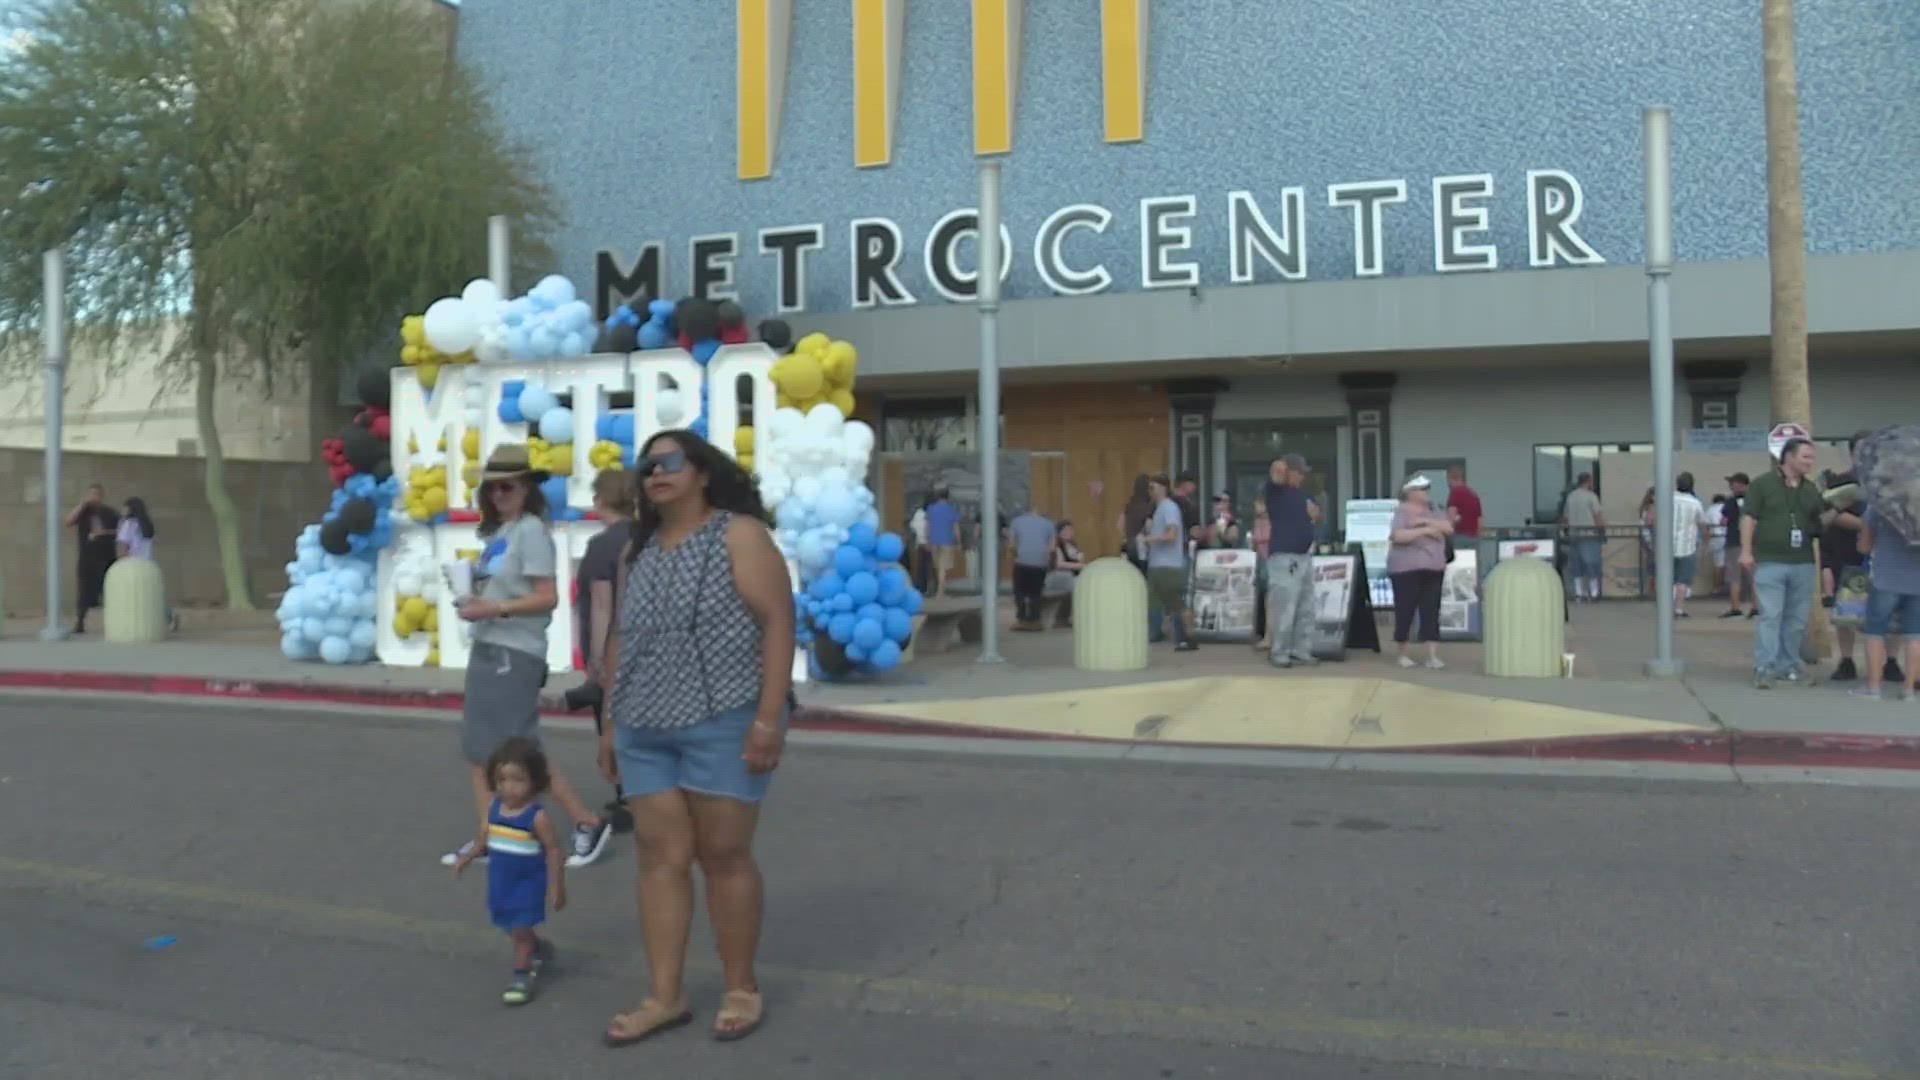 Metrocenter mall, which closed in 2020, is set to be demolished to make room for redevelopment